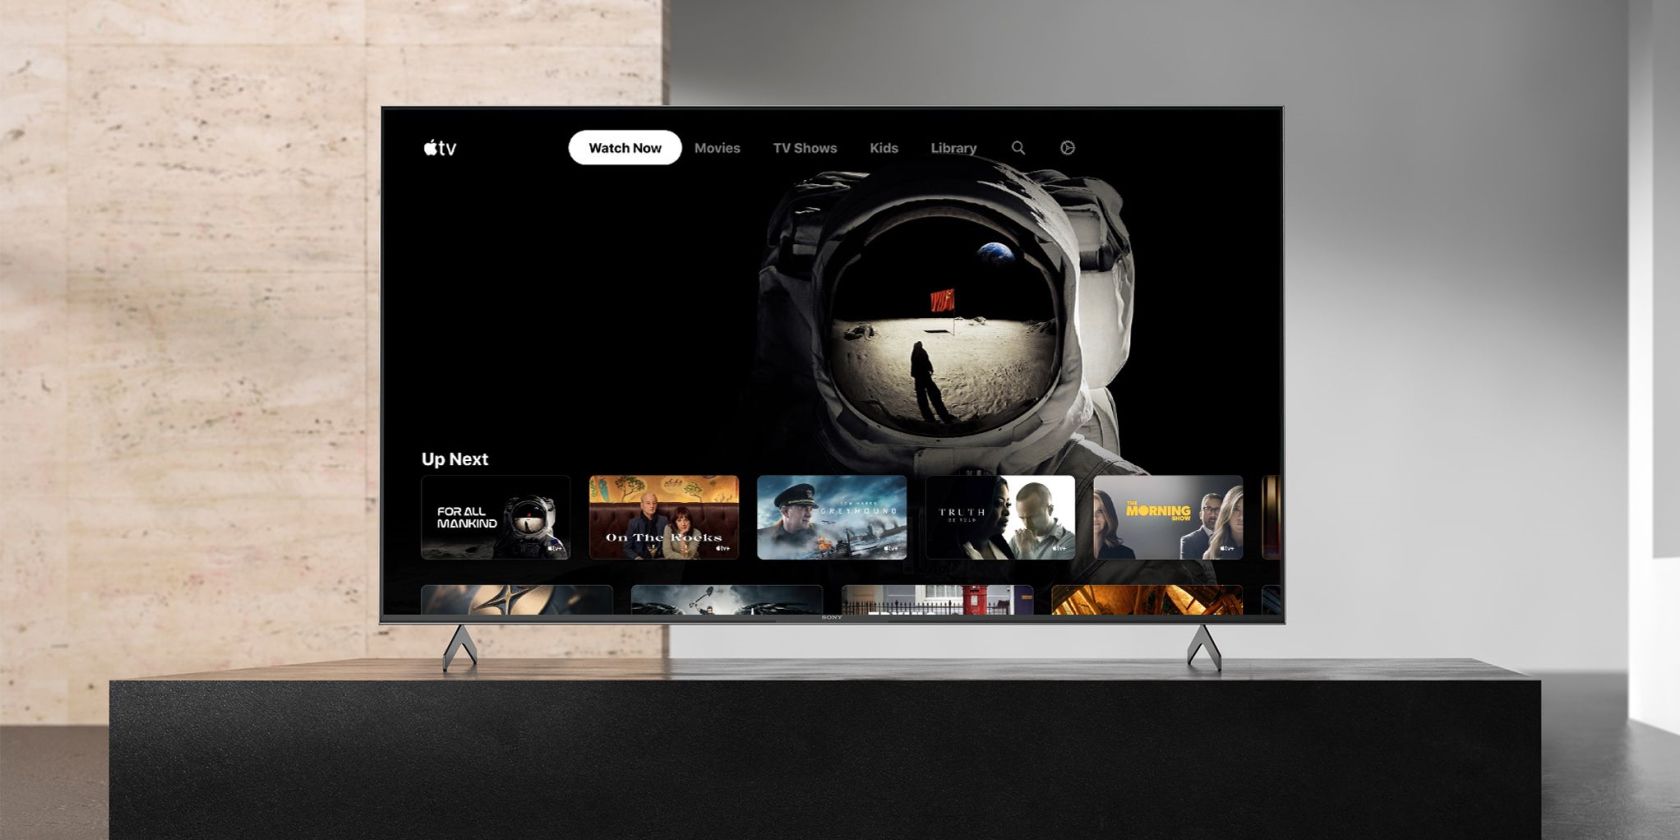 is the apple tv app available on sony tvs